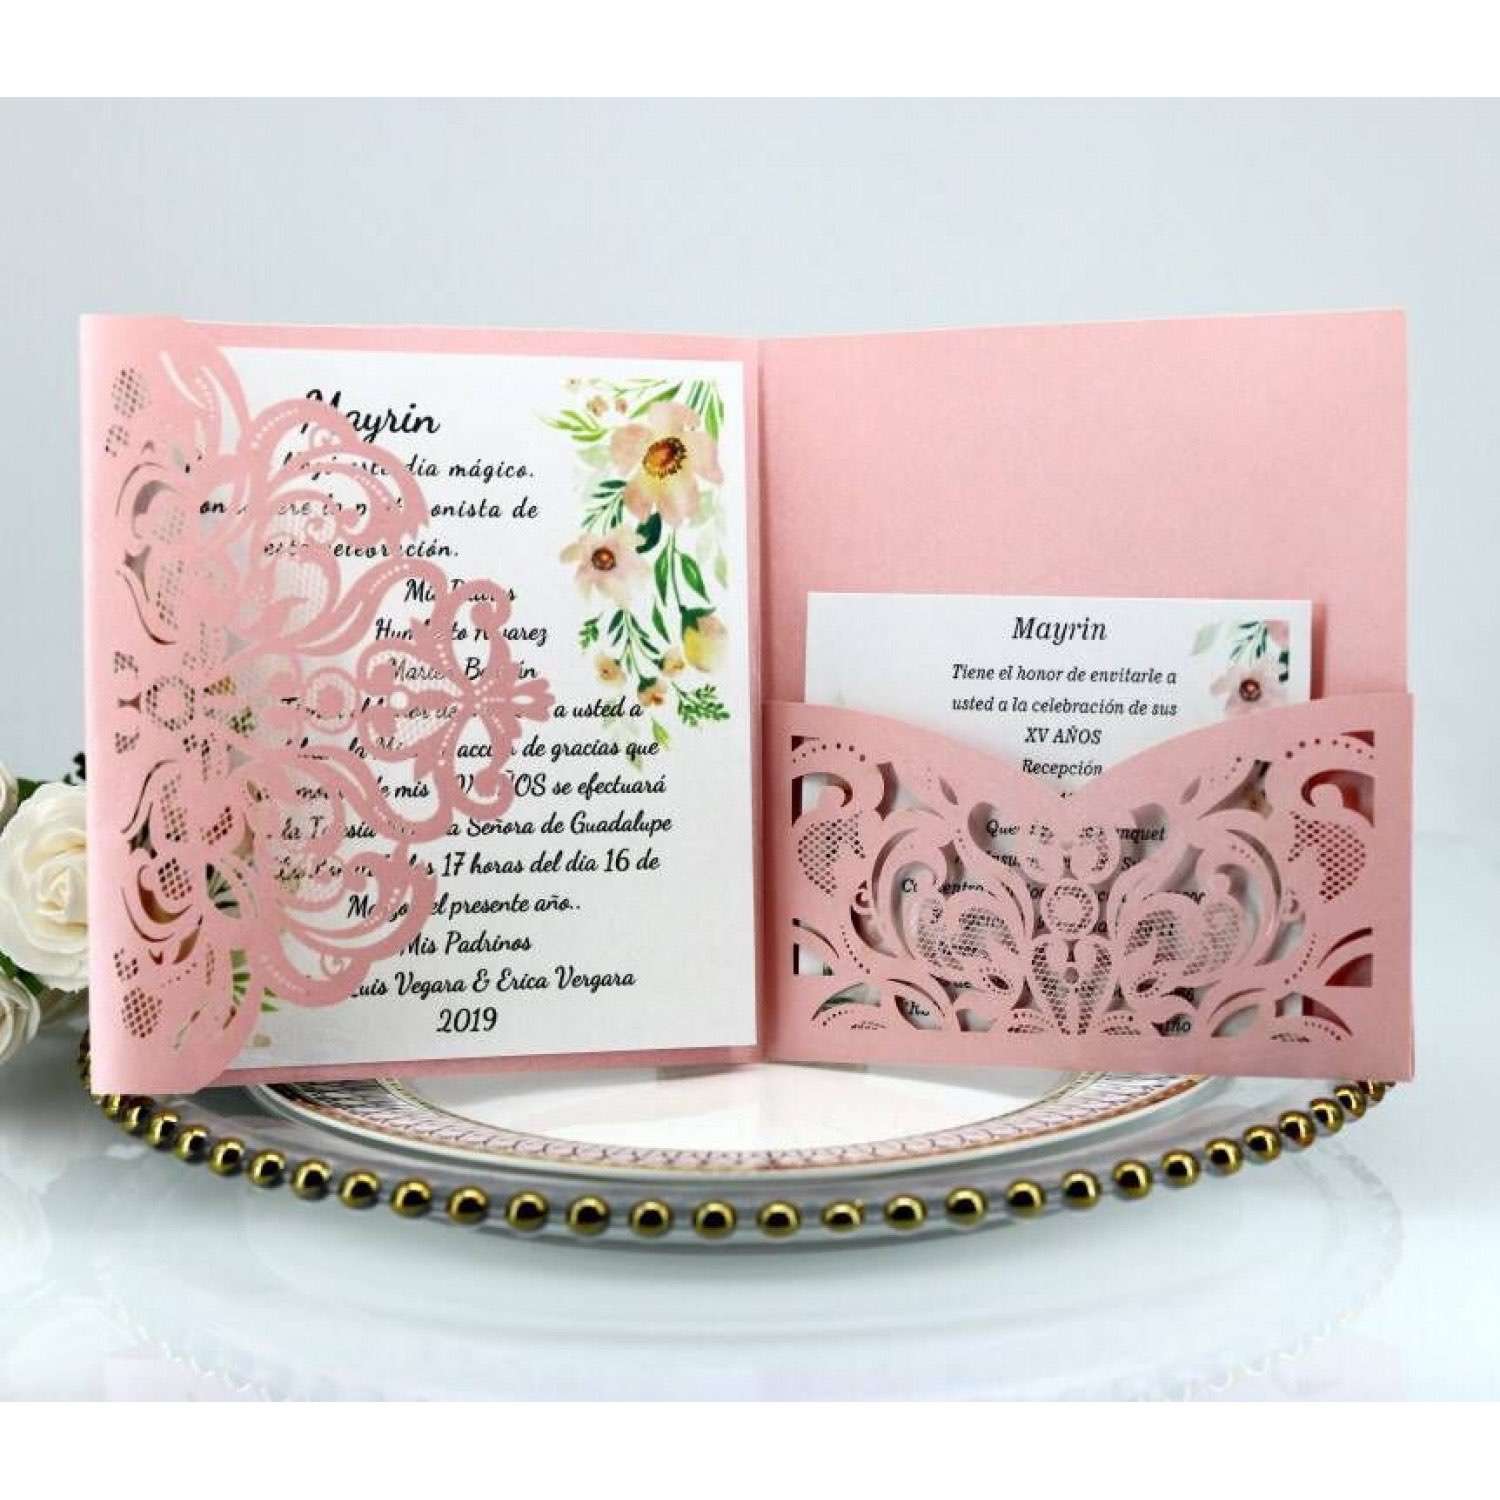 Iridescent Invitation Card Thank You Card With Envelope New Wedding Invitation